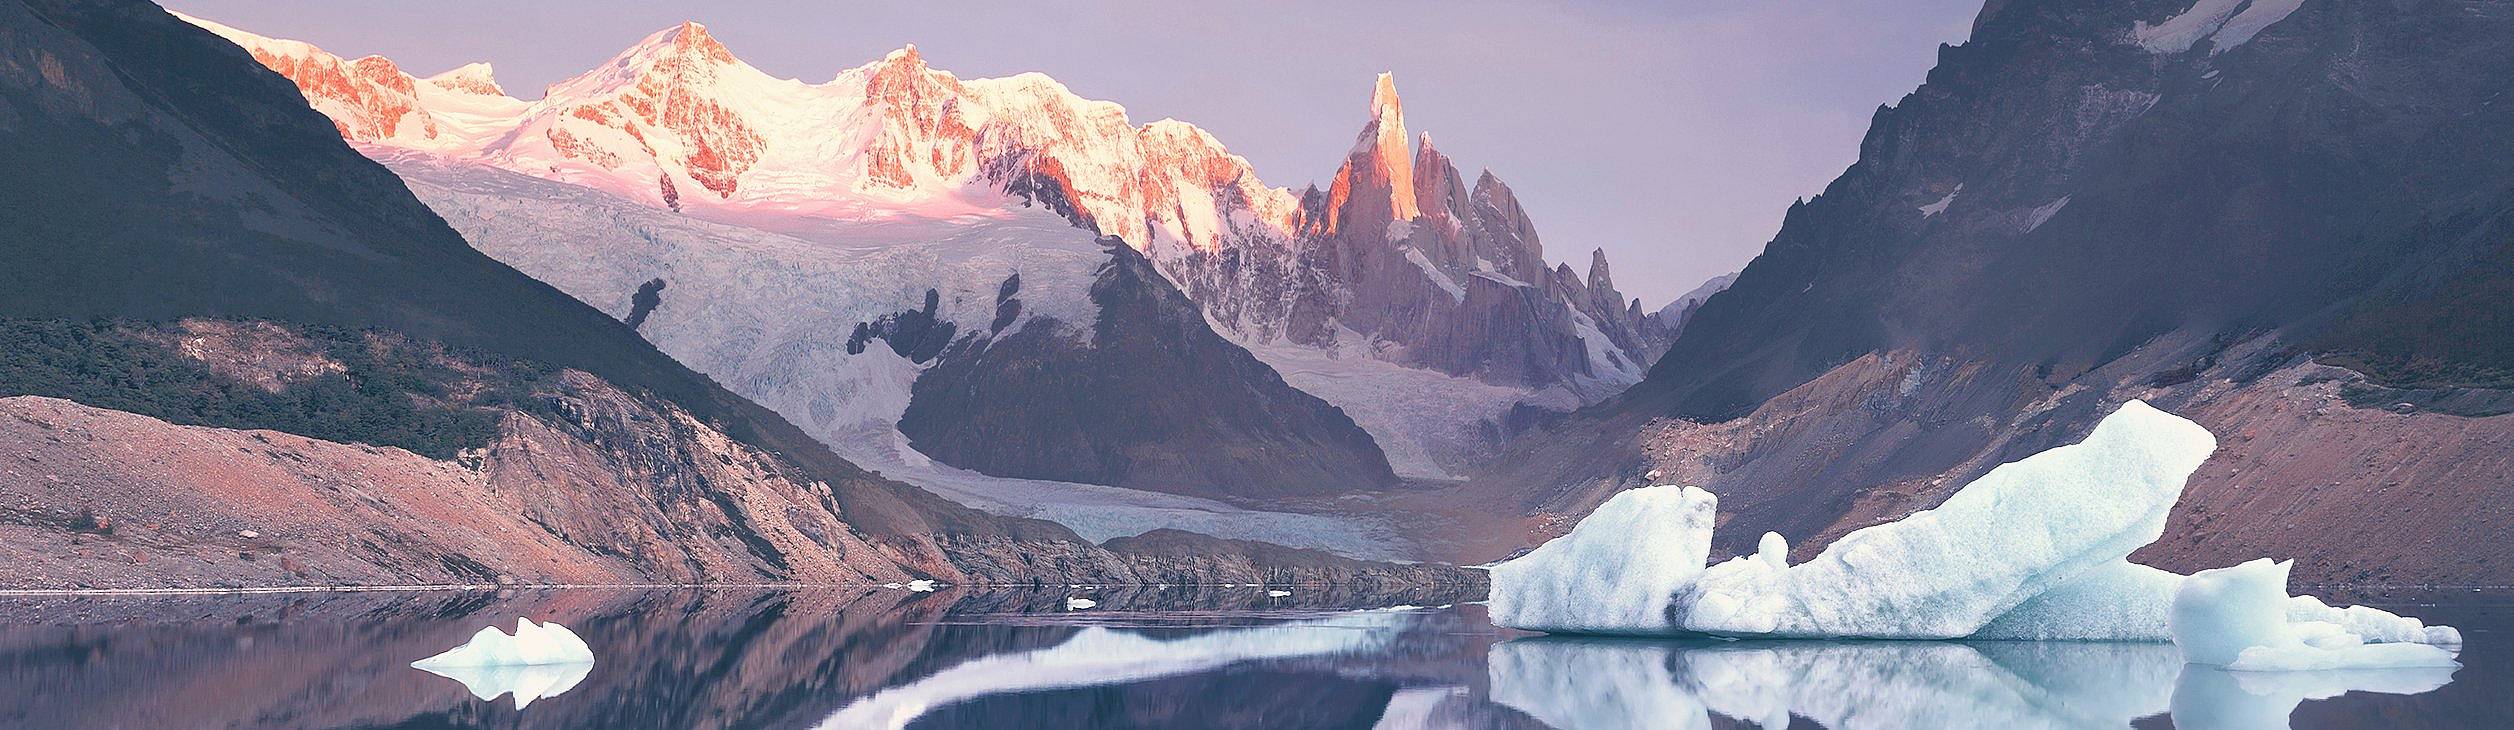 Mount Torre (Fitz Roy) at sunrise. Los Glaciares National Pa